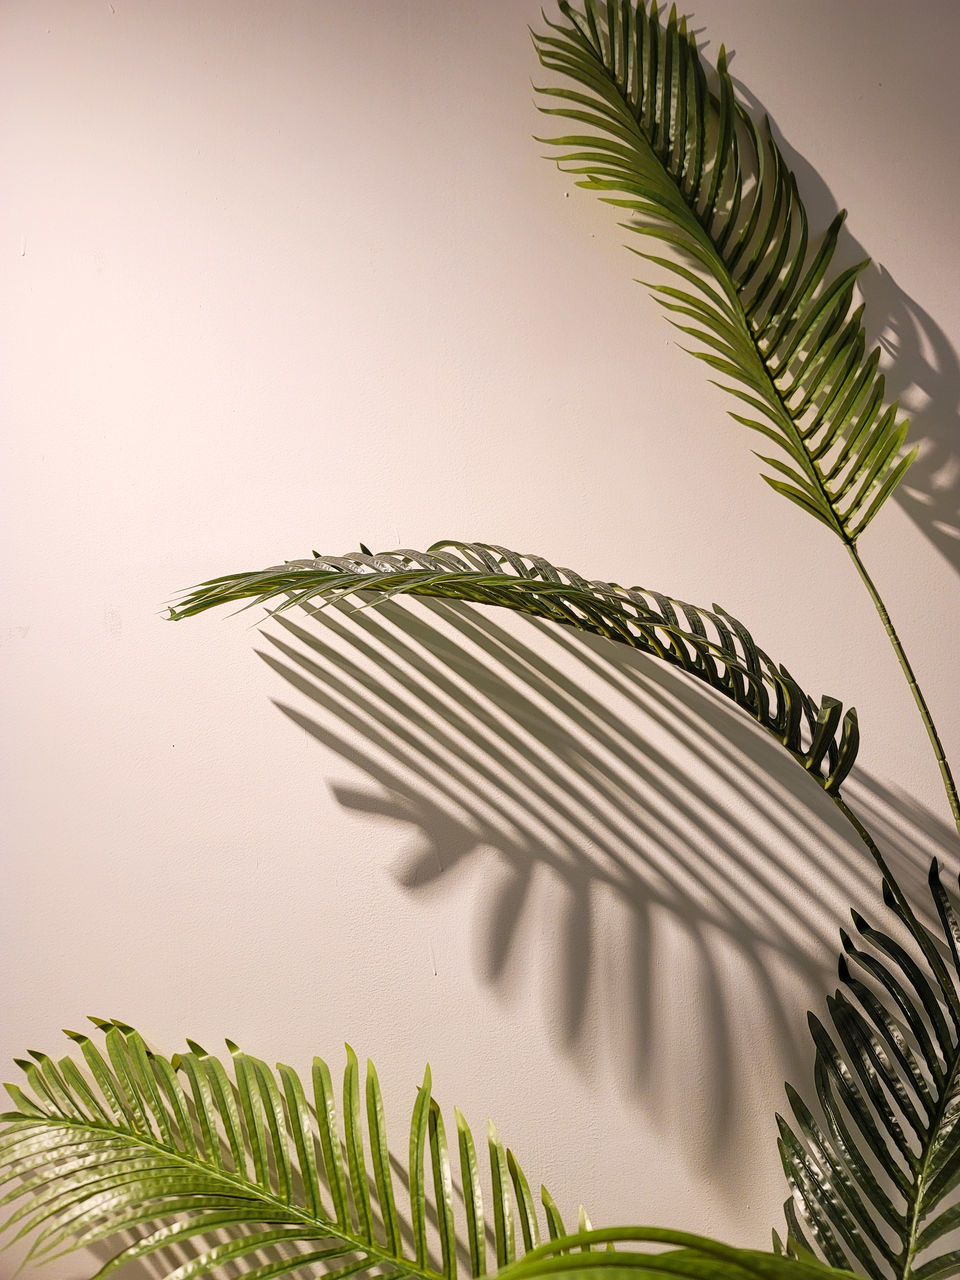 branch, leaf, palm tree, plant, palm leaf, plant part, tree, nature, twig, green, no people, frond, tropical climate, grass, growth, indoors, close-up, studio shot, beauty in nature